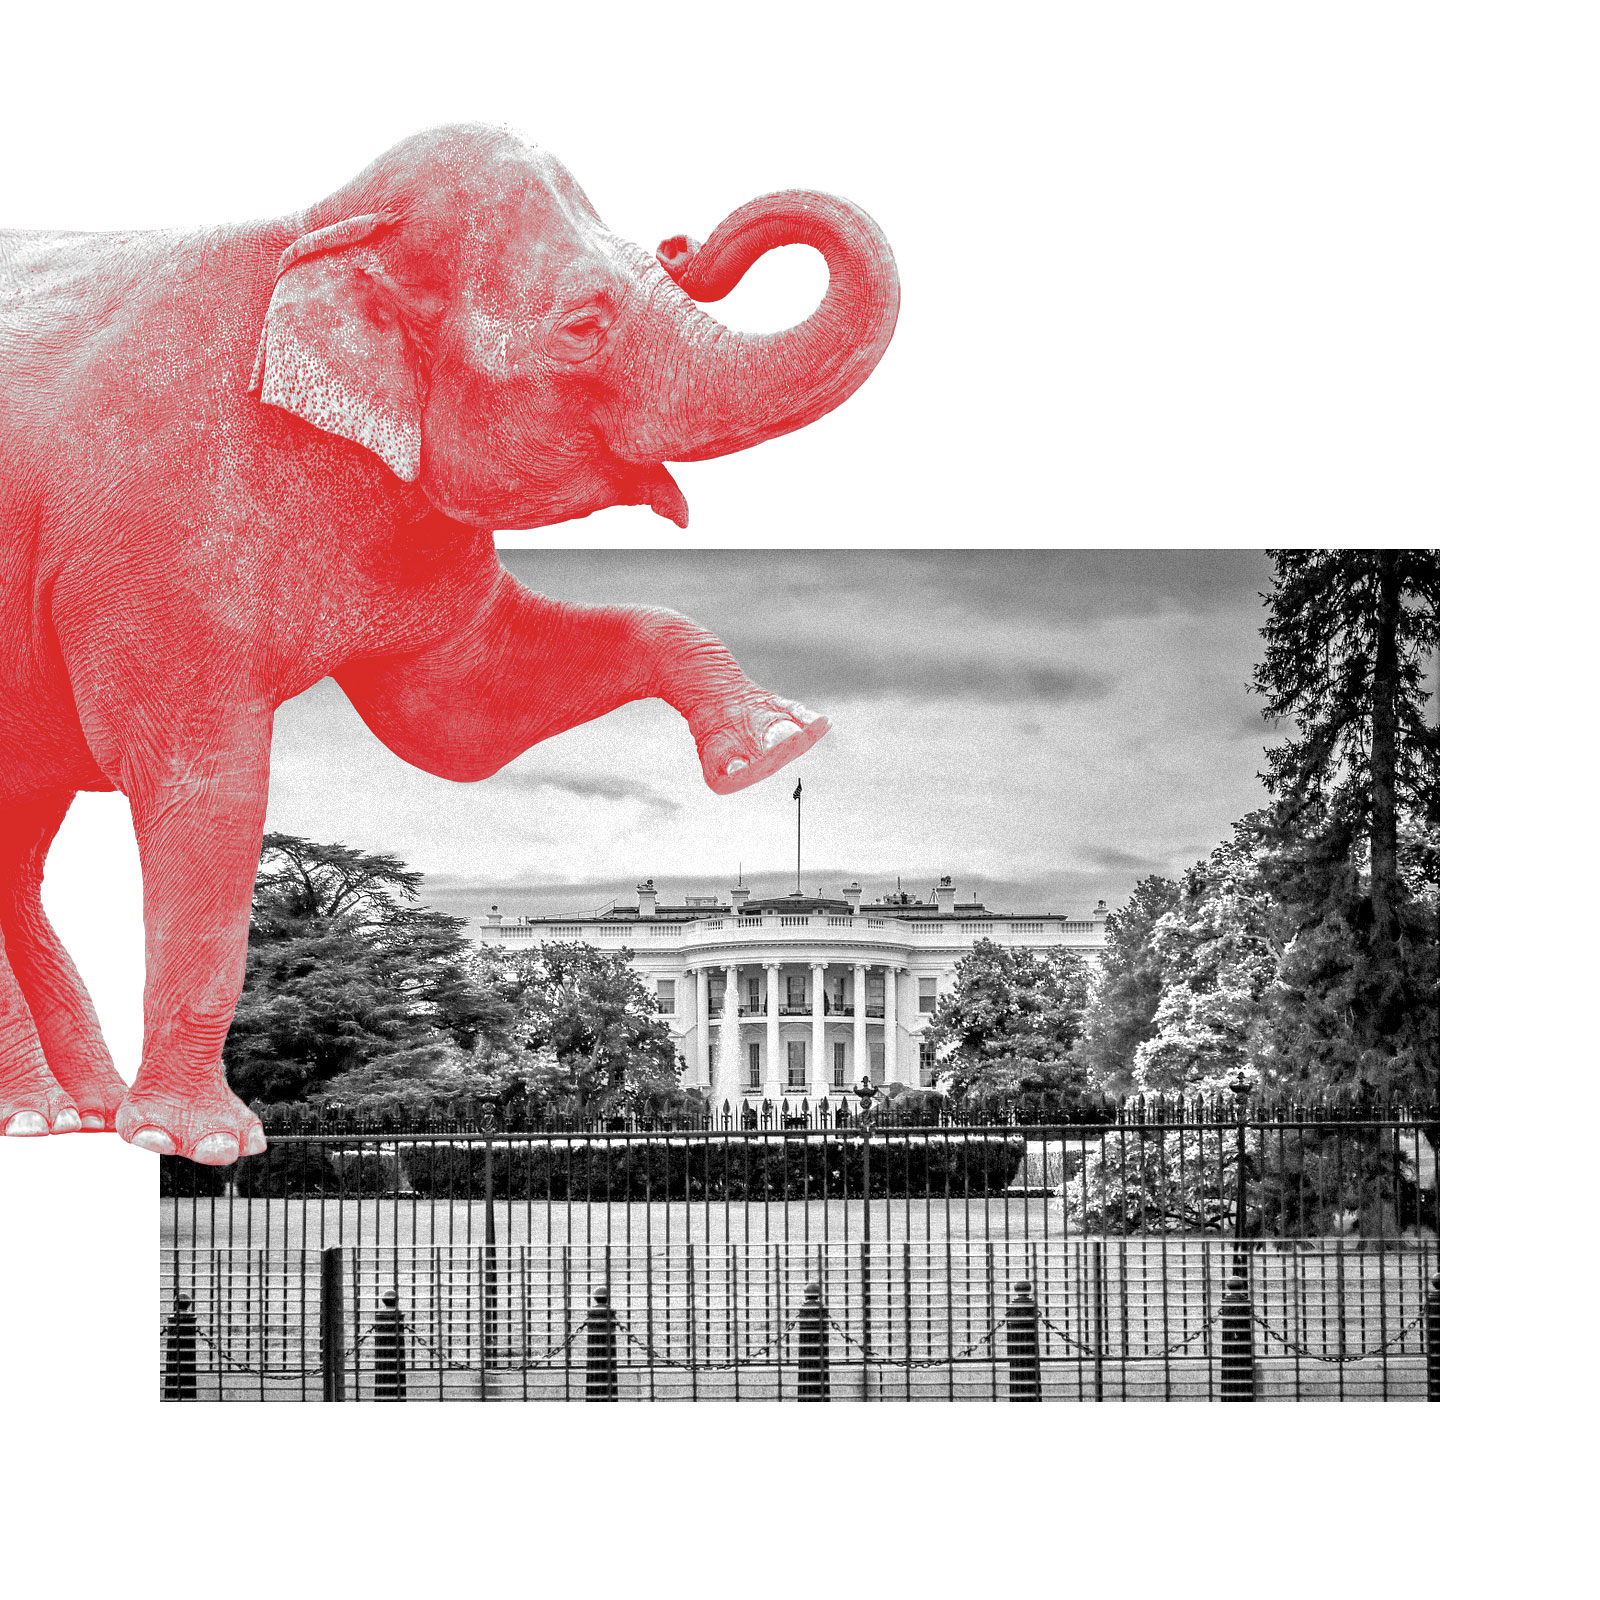 A red elephant stomping on the White House